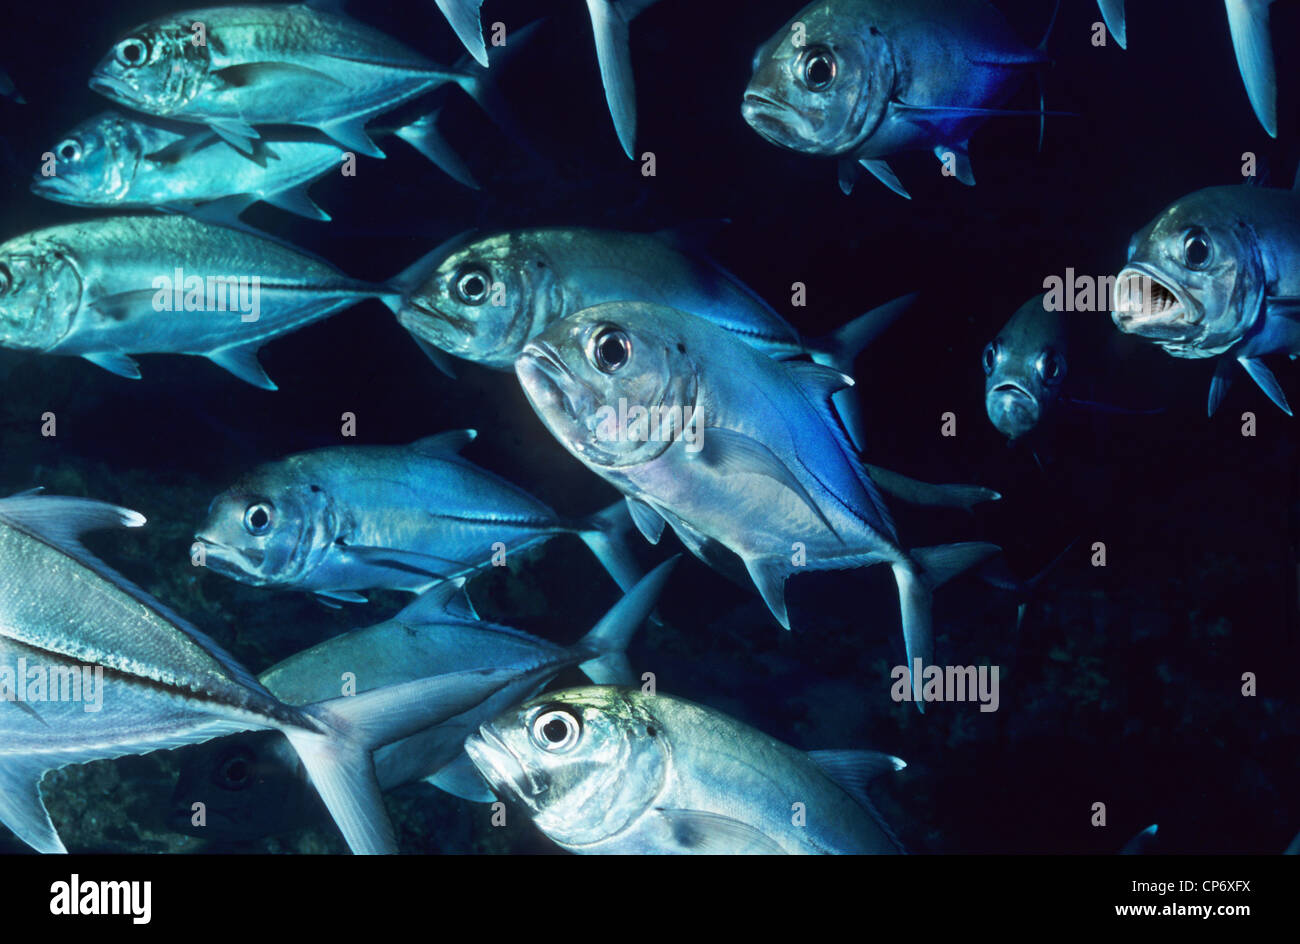 Big - Eye Trevally or Horse Eyed Jack. Large shoals of these fish are found throughout the Red Sea. Stock Photo